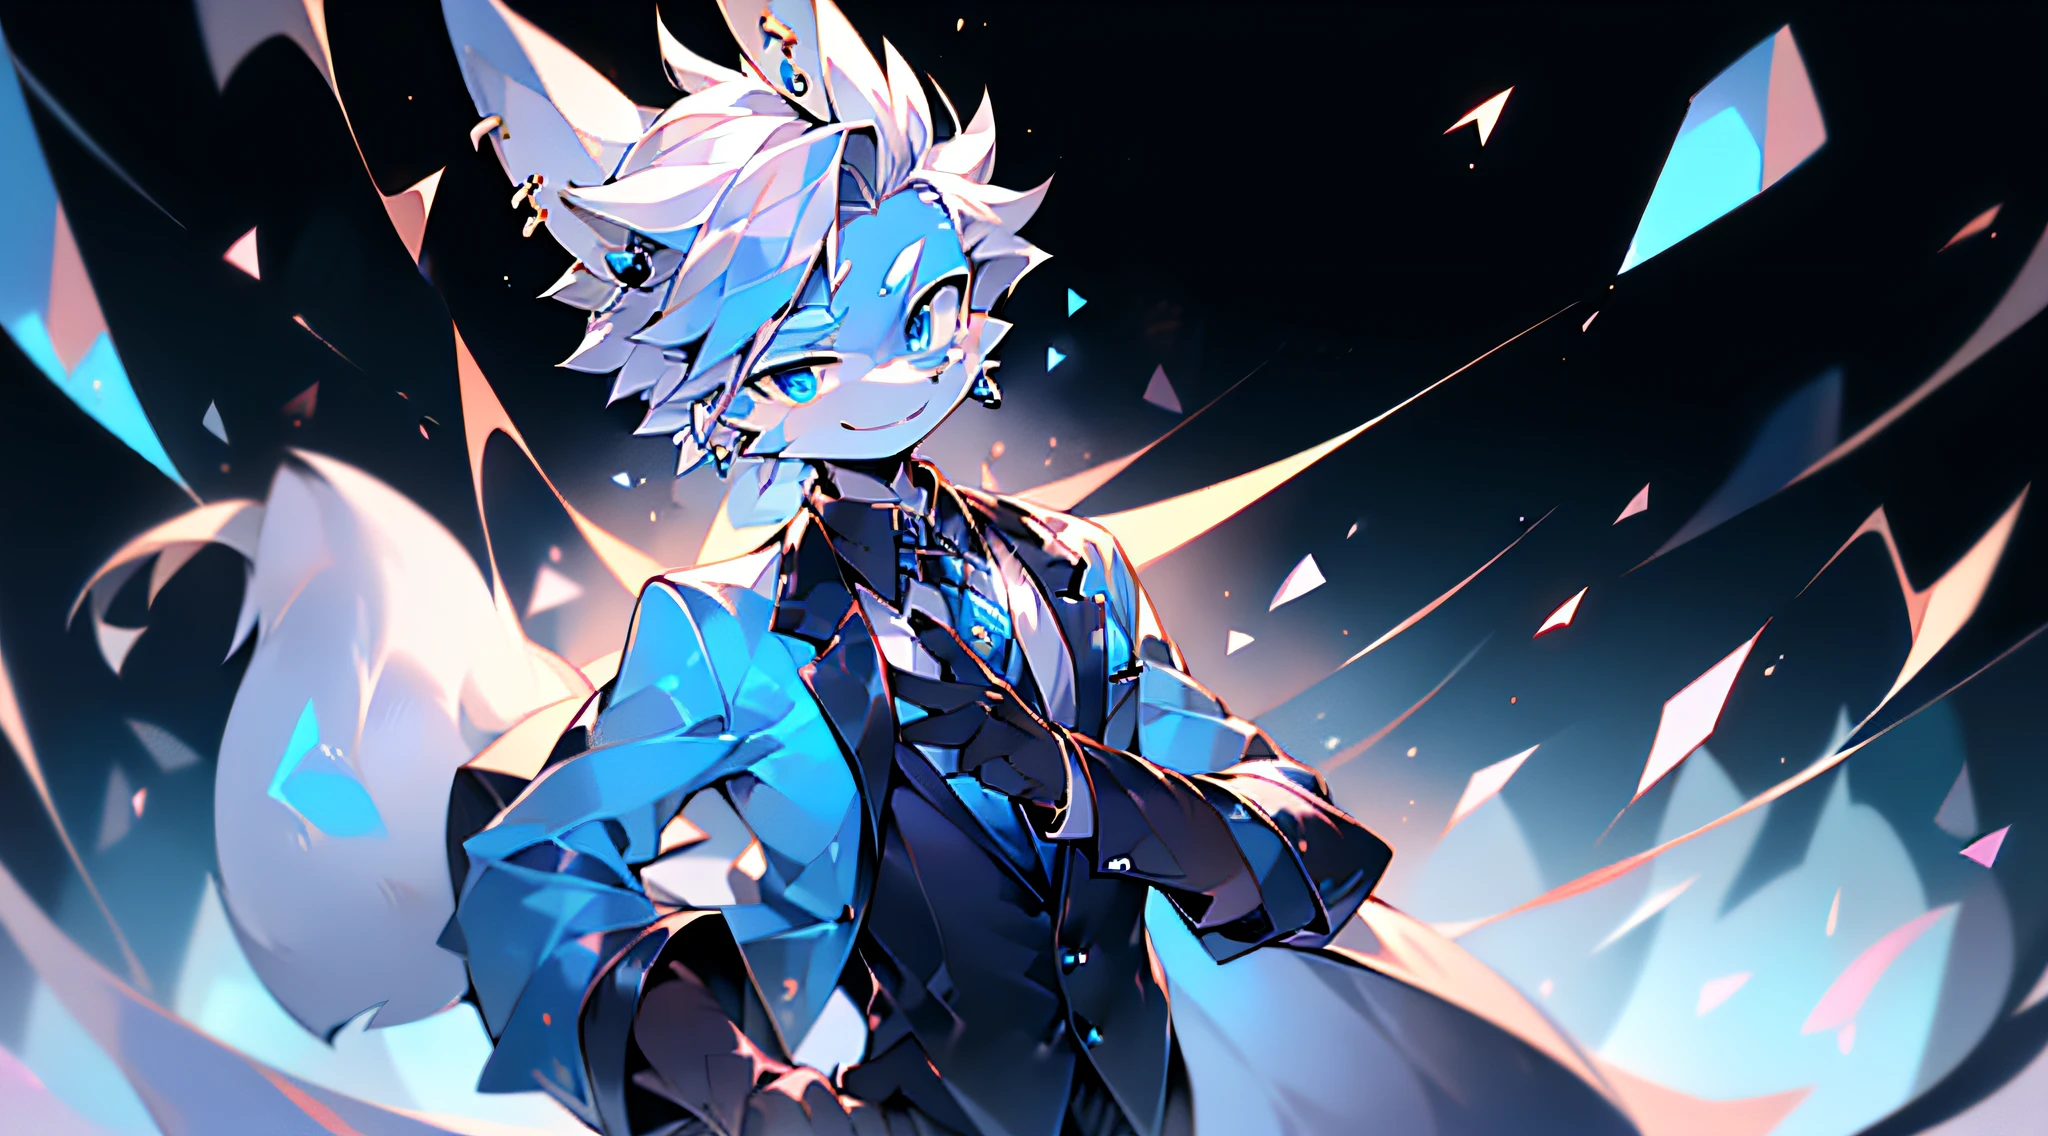 (highres),rabbit,grey fur,animal ears,elongated ears,male,sapphire blue eyes,The hair on the chest and abdomen is white,The hair around the mouth is white,solo person,charming smile,villainous character,right ear earring,silver earring,bad guy,suit shirt,young boy,tough guy